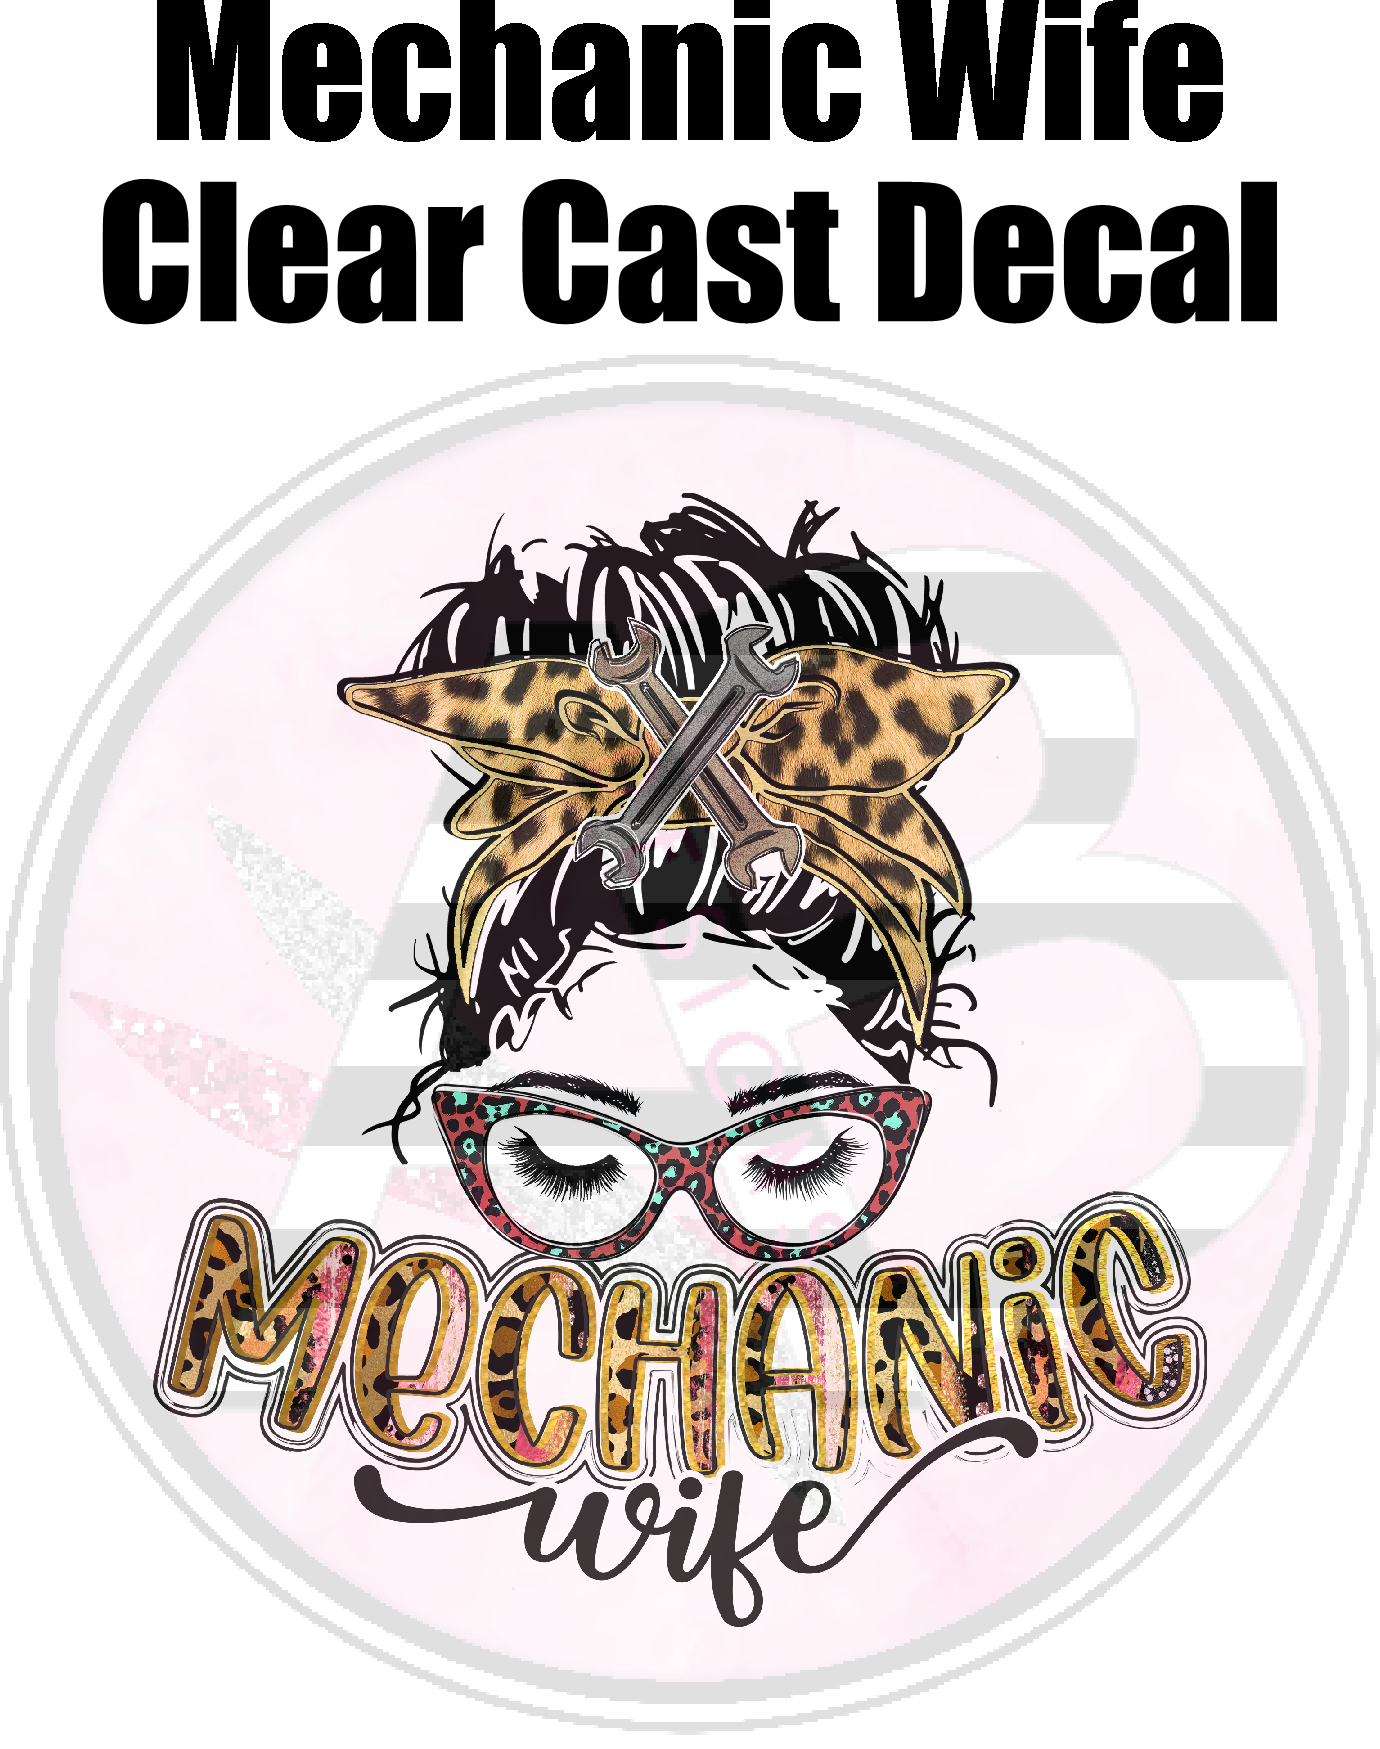 Mechanic Wife - Clear Cast Decal